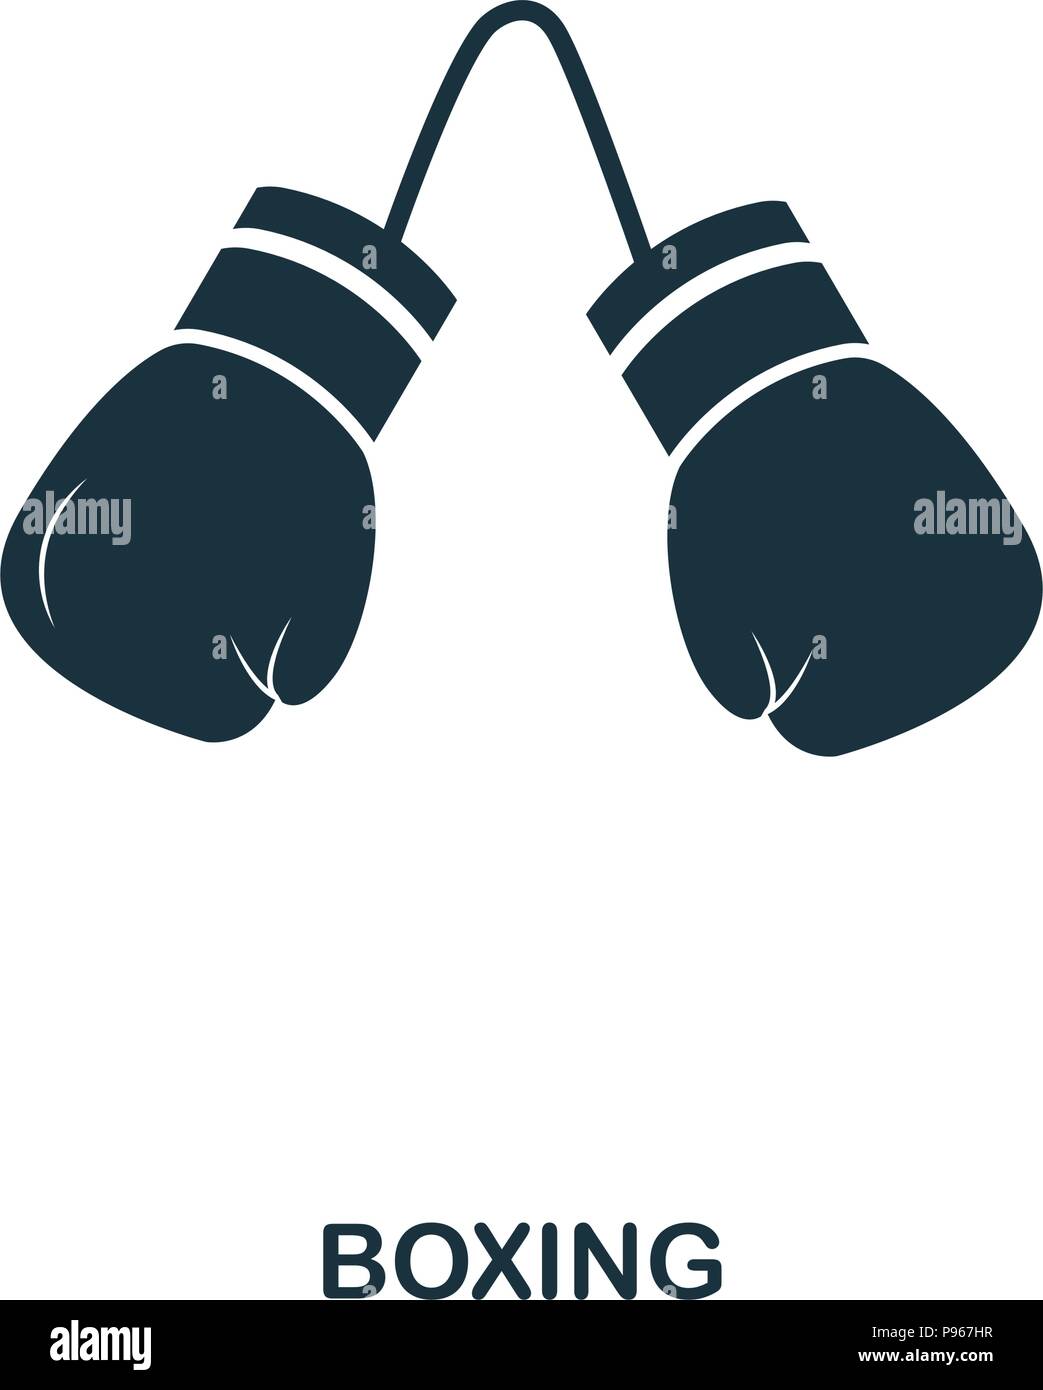 Boxing icon. Premium style icon design. UI. Illustration of boxing icon. Pictogram isolated on white. Ready to use in web design, apps, software, prin Stock Vector